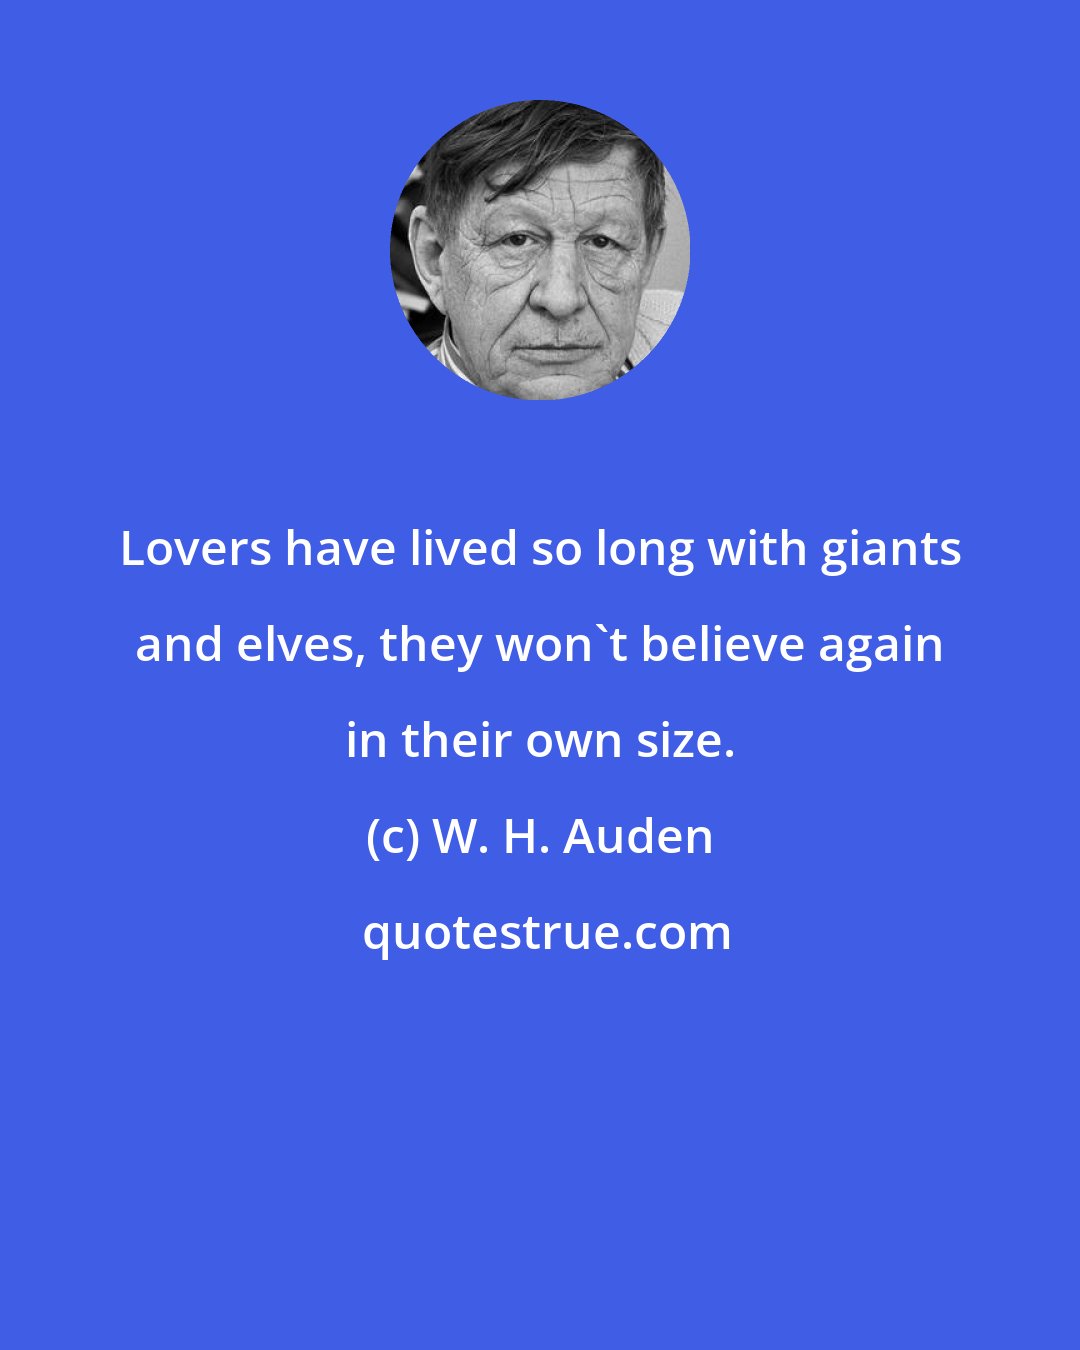 W. H. Auden: Lovers have lived so long with giants and elves, they won't believe again in their own size.